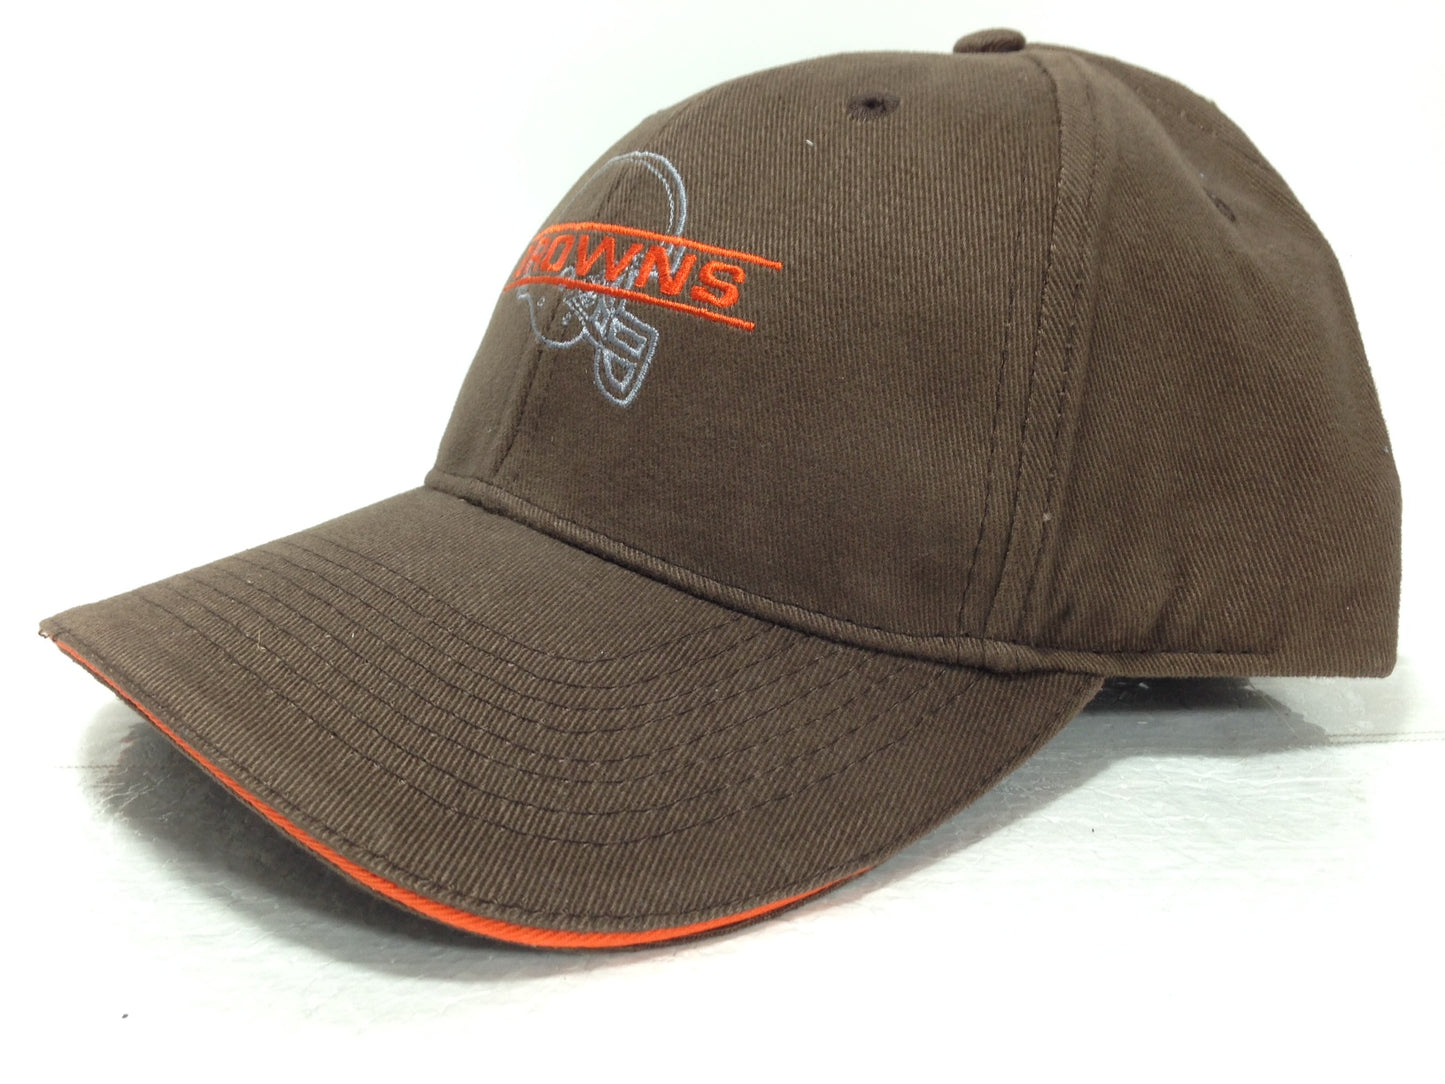 Cleveland Browns Vintage NFL Brown Silhouette Cap by Drew Pearson Marketing